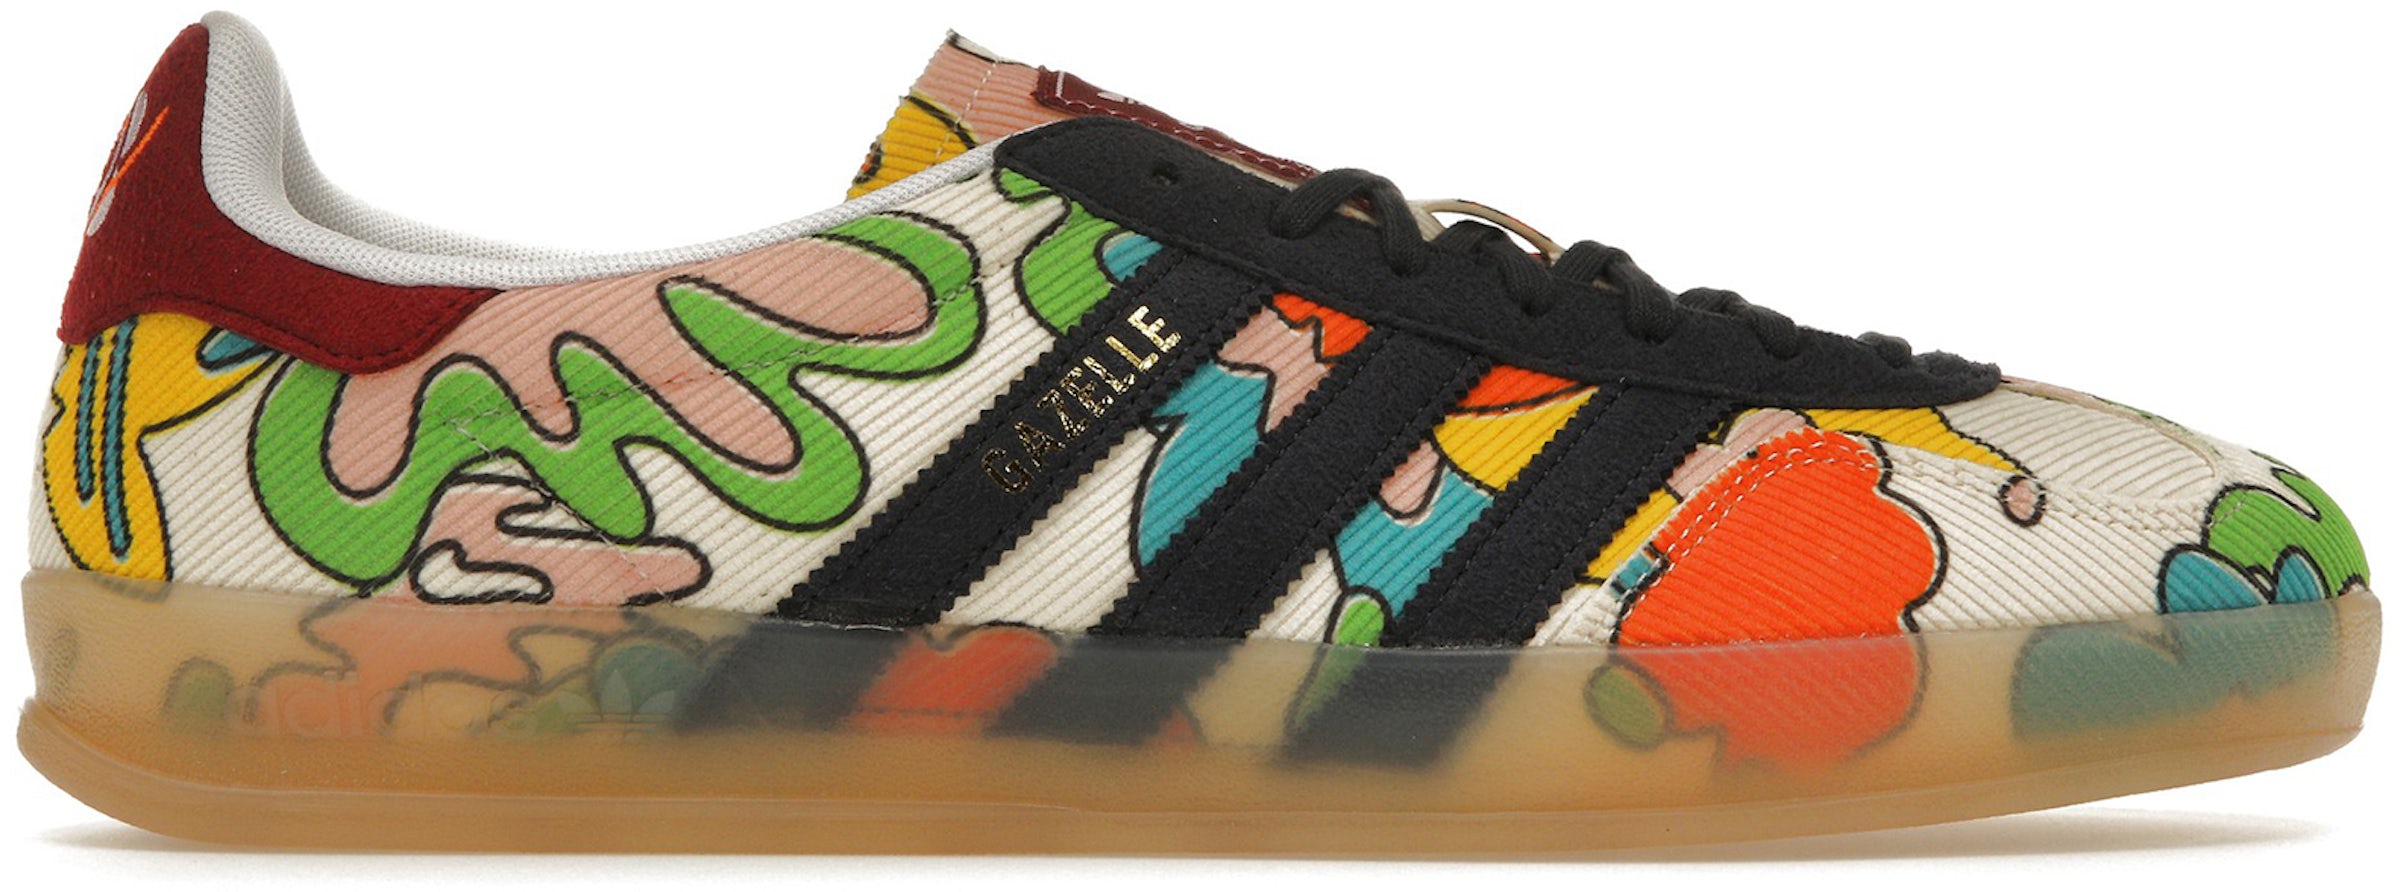 & Gazelle adidas Shoes New Sneakers Buy StockX -